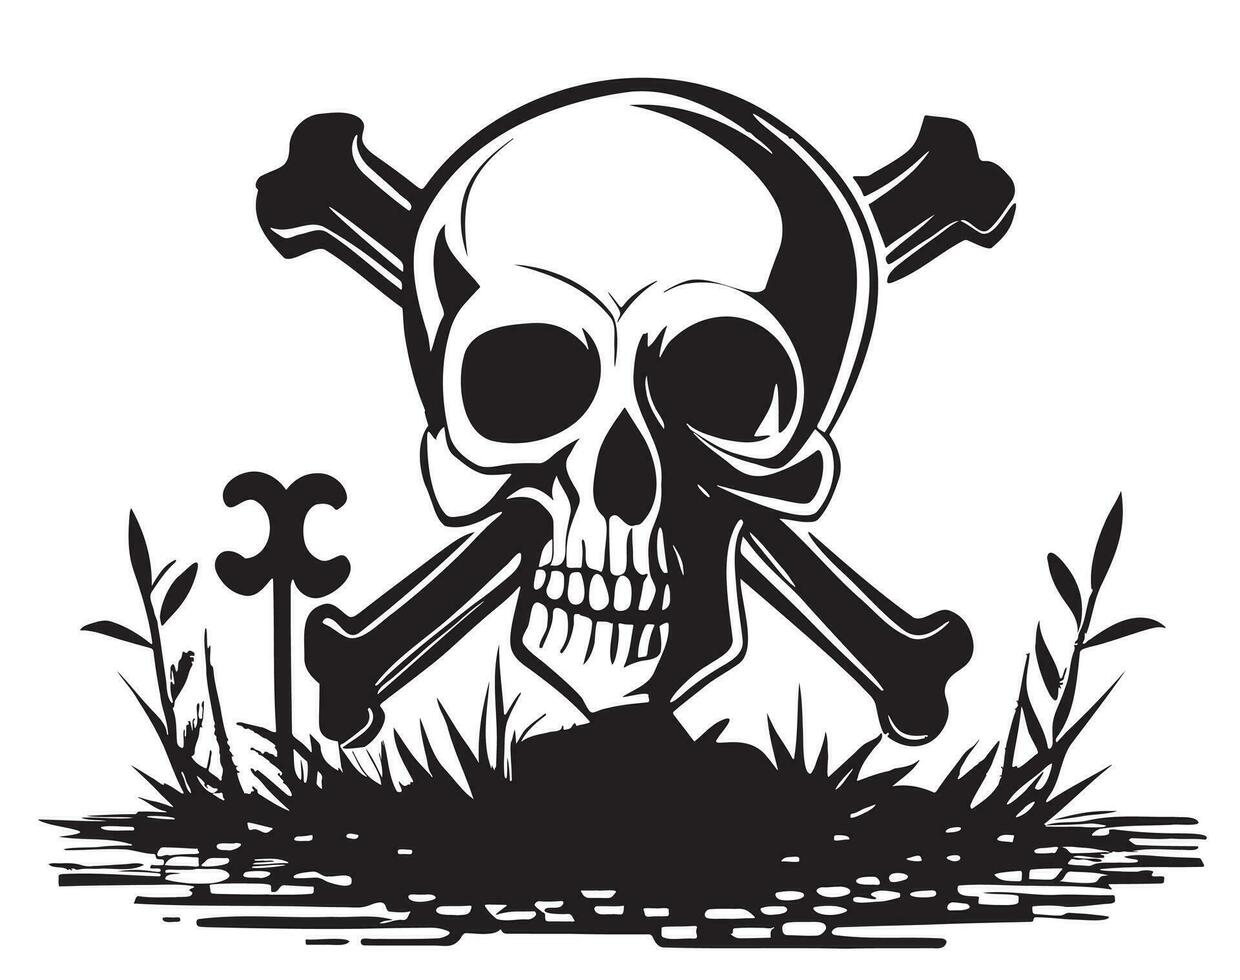 Skull with bones sketch hand drawn in doodle style Vector illustration